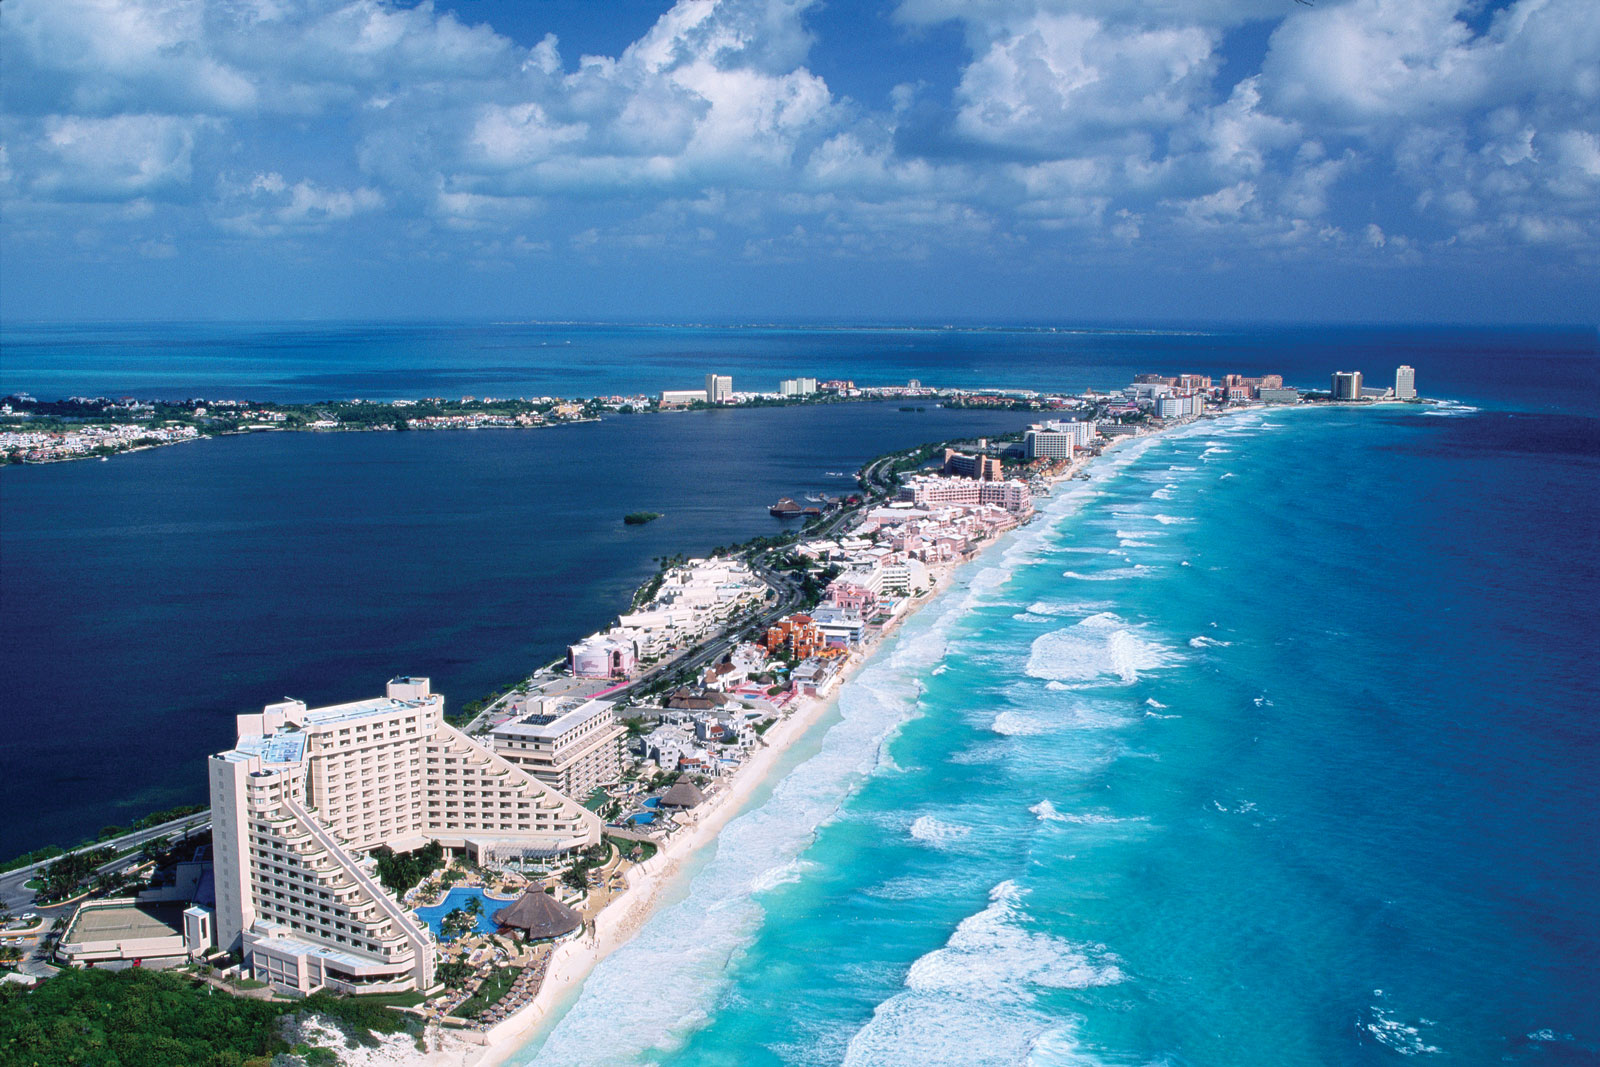 Things to do in Cancun.